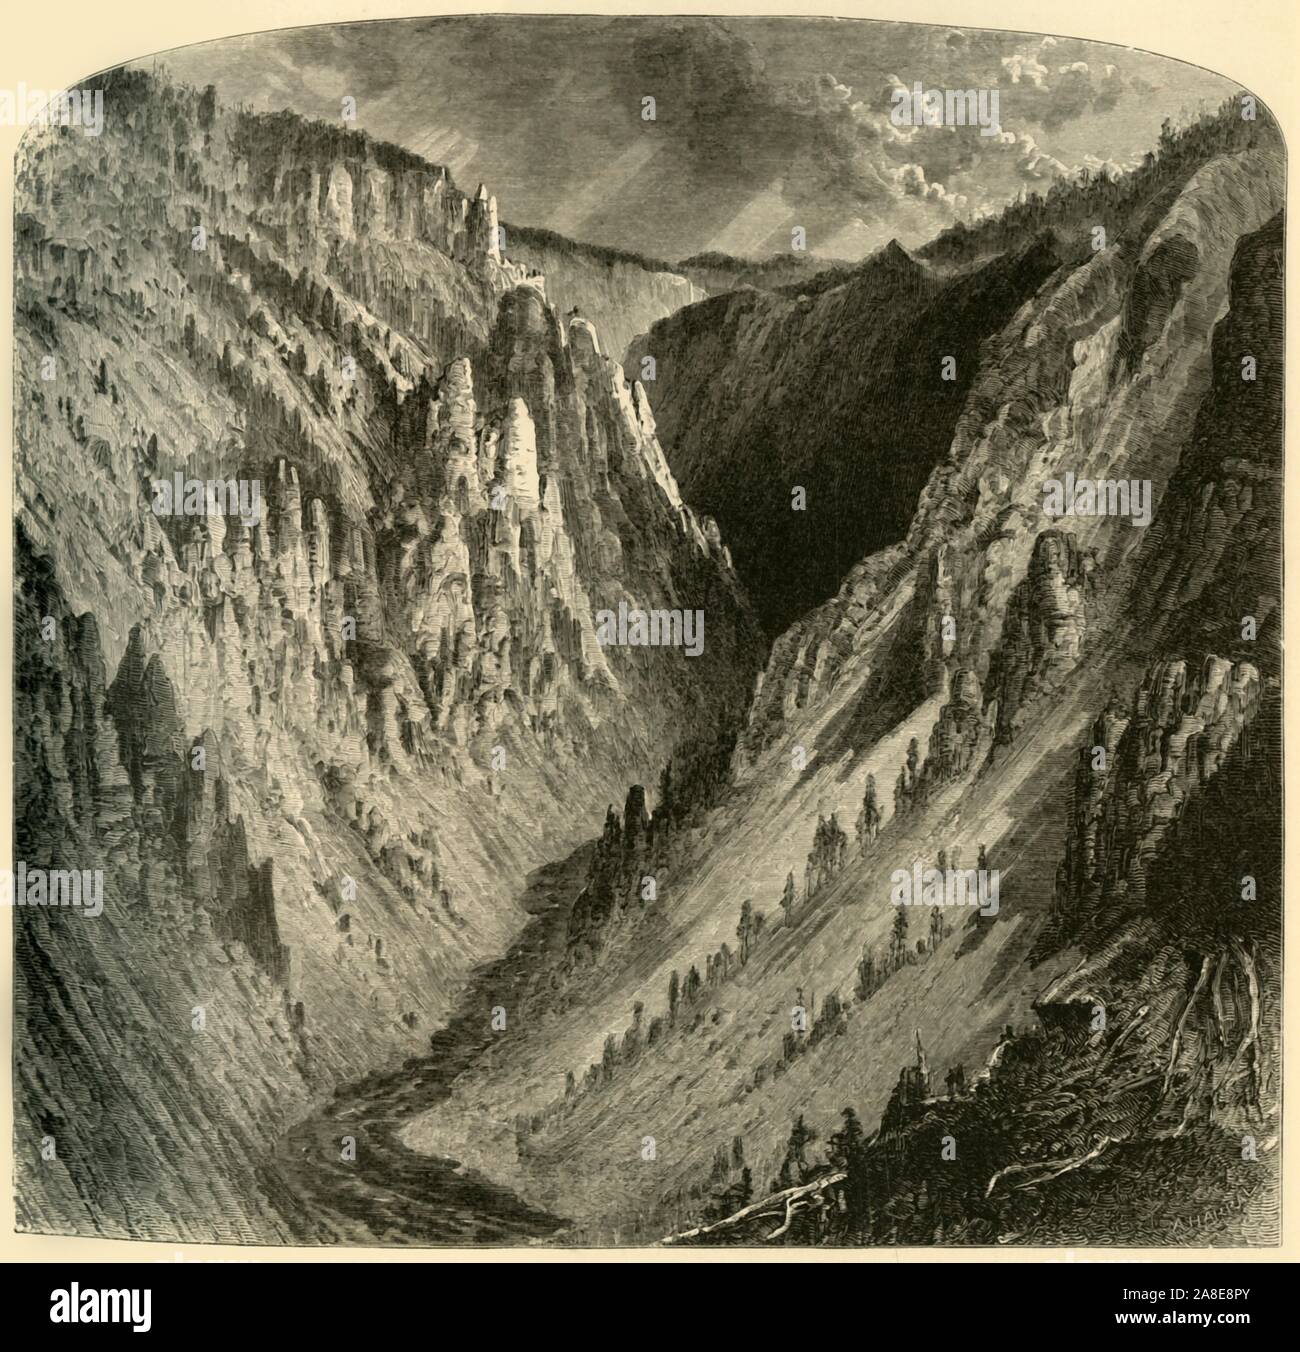 'Ca&#xf1;on of the Yellowstone', 1872. Canyon in Yellowstone National Park, USA. From &quot;Picturesque America; or, The Land We Live In, A Delineation by Pen and Pencil of the Mountains, Rivers, Lakes...with Illustrations on Steel and Wood by Eminent American Artists&quot; Vol. I, edited by William Cullen Bryant. [D. Appleton and Company, New York, 1872] Stock Photo